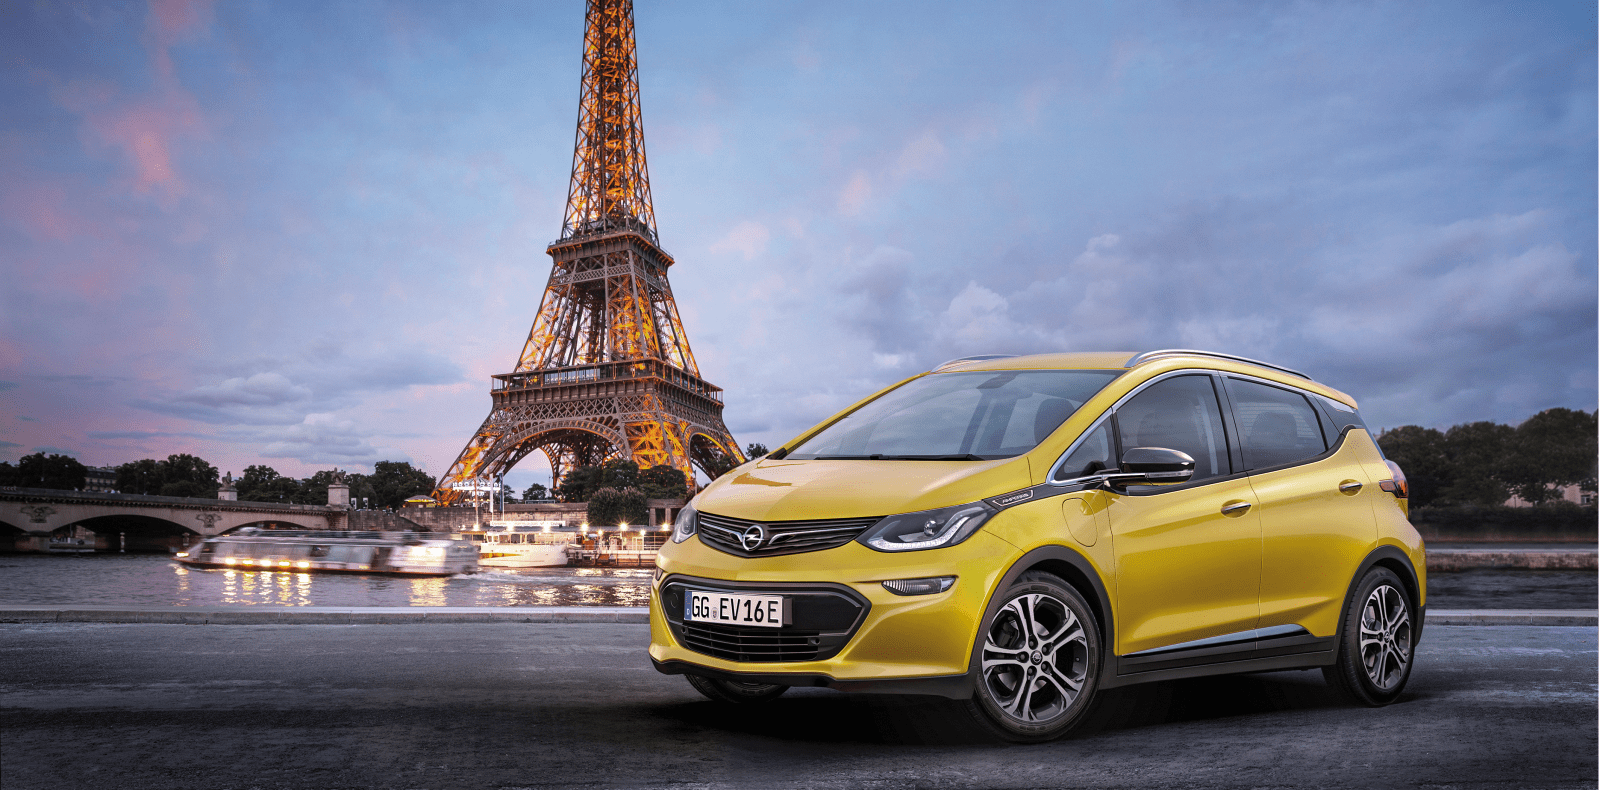 Paris to only allow electric cars as soon as 2030 ahead of